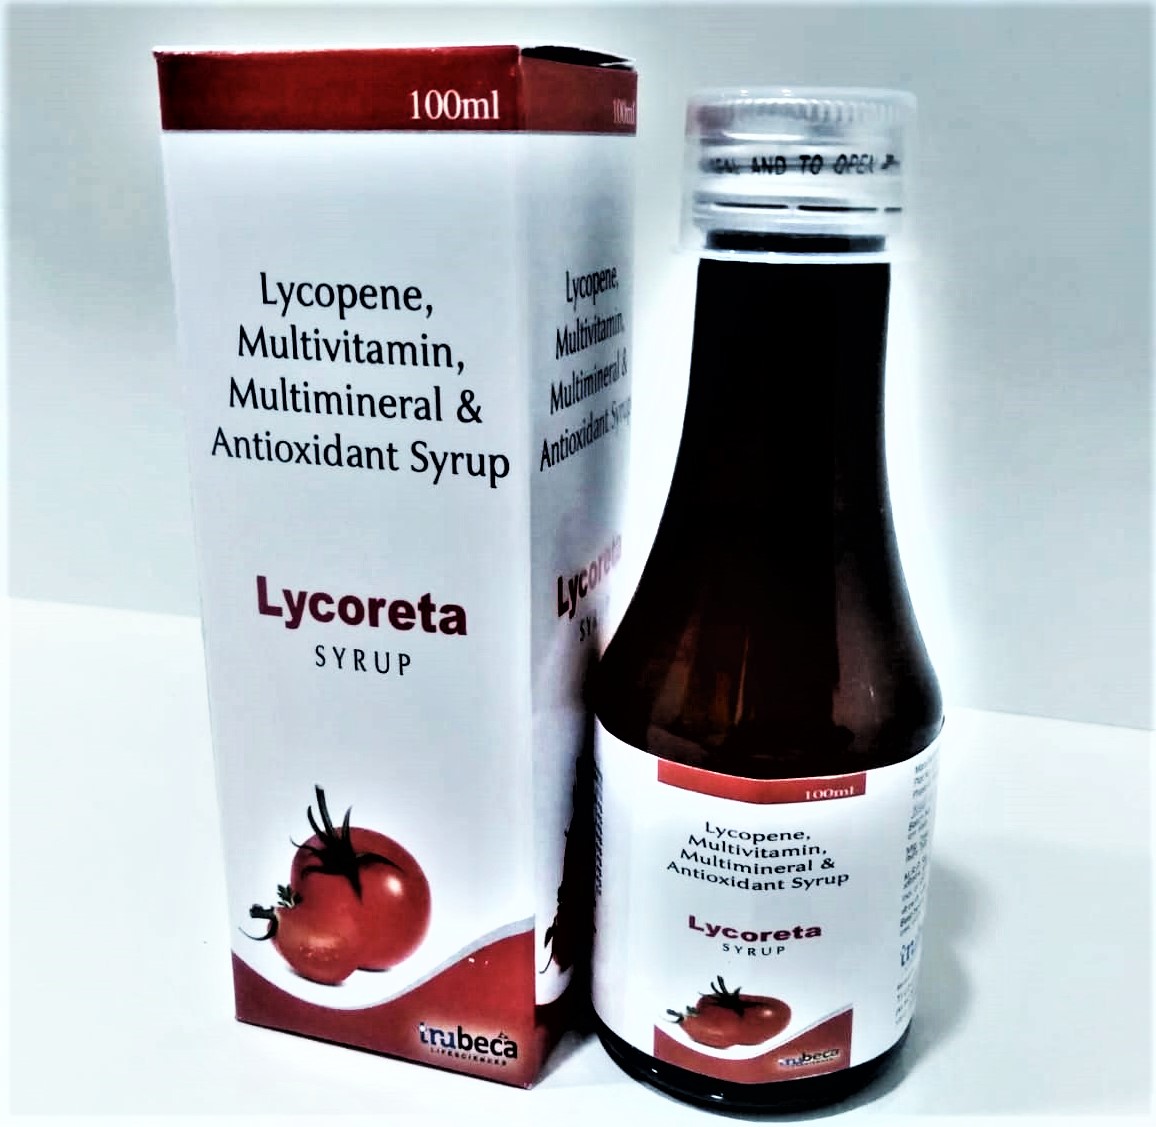 lycopene + multivitamins + multiminerals + antioxidant syrup with monocarton (food)